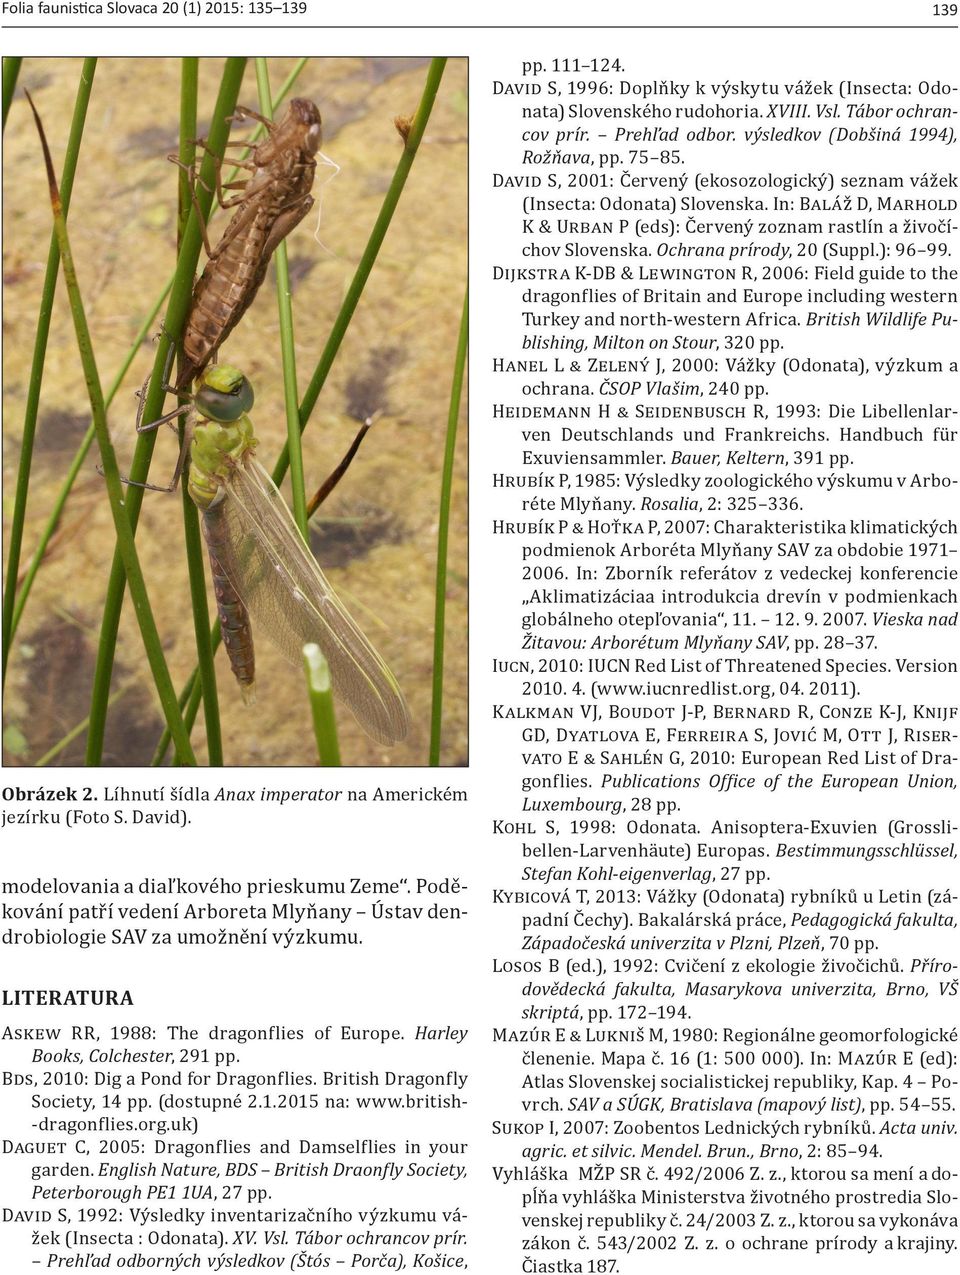 Bds, 2010: Dig a Pond for Dragonflies. British Dragonfly Society, 14 pp. (dostupné 2.1.2015 na: www.british- -dragonflies.org.uk) Daguet C, 2005: Dragonflies and Damselflies in your garden.